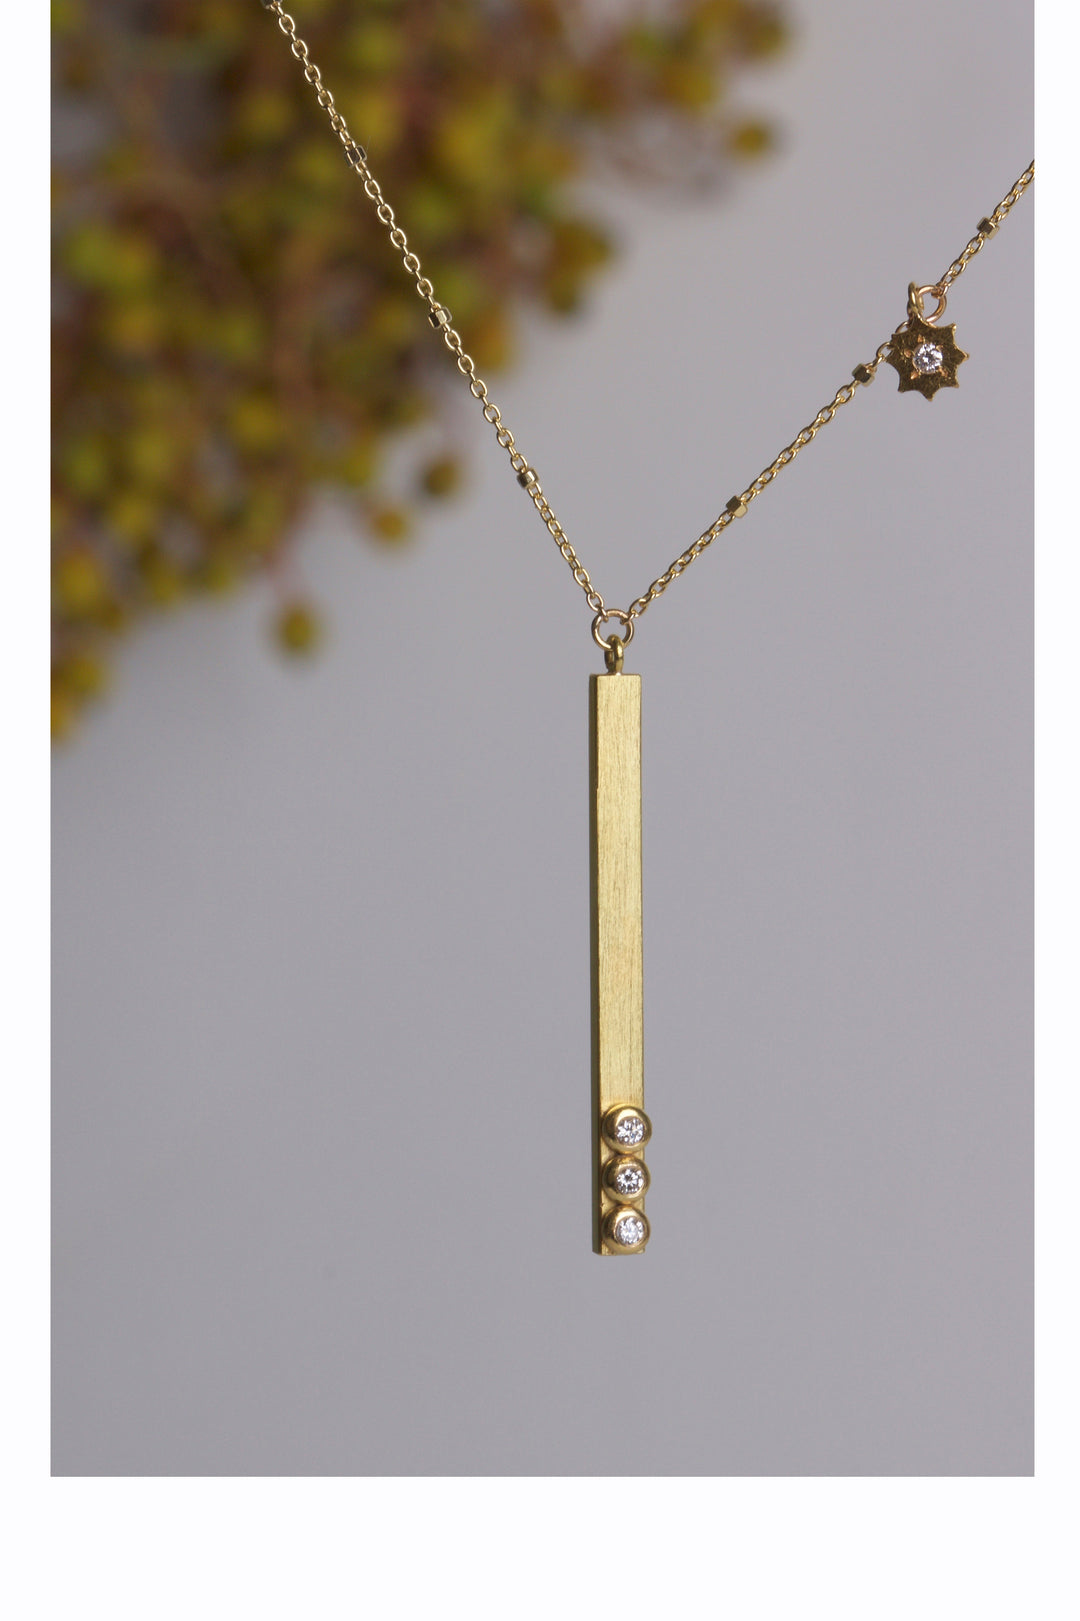 Gold bar and Charm Necklace 06069 - Ormachea Jewelry